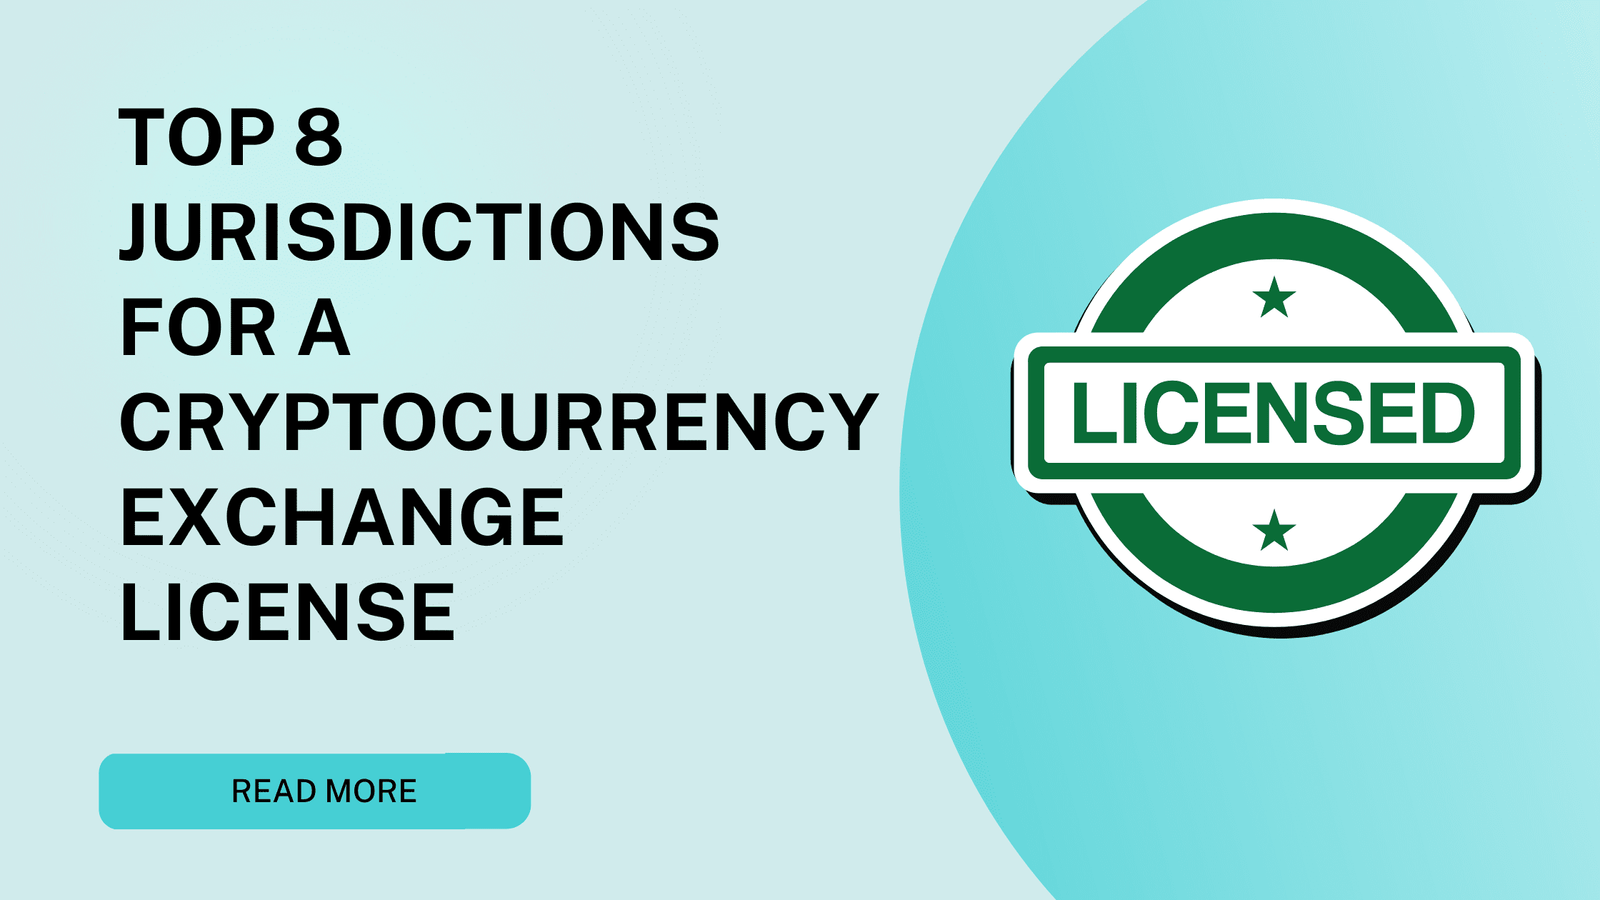 Top 8 jurisdictions for a cryptocurrency exchange license